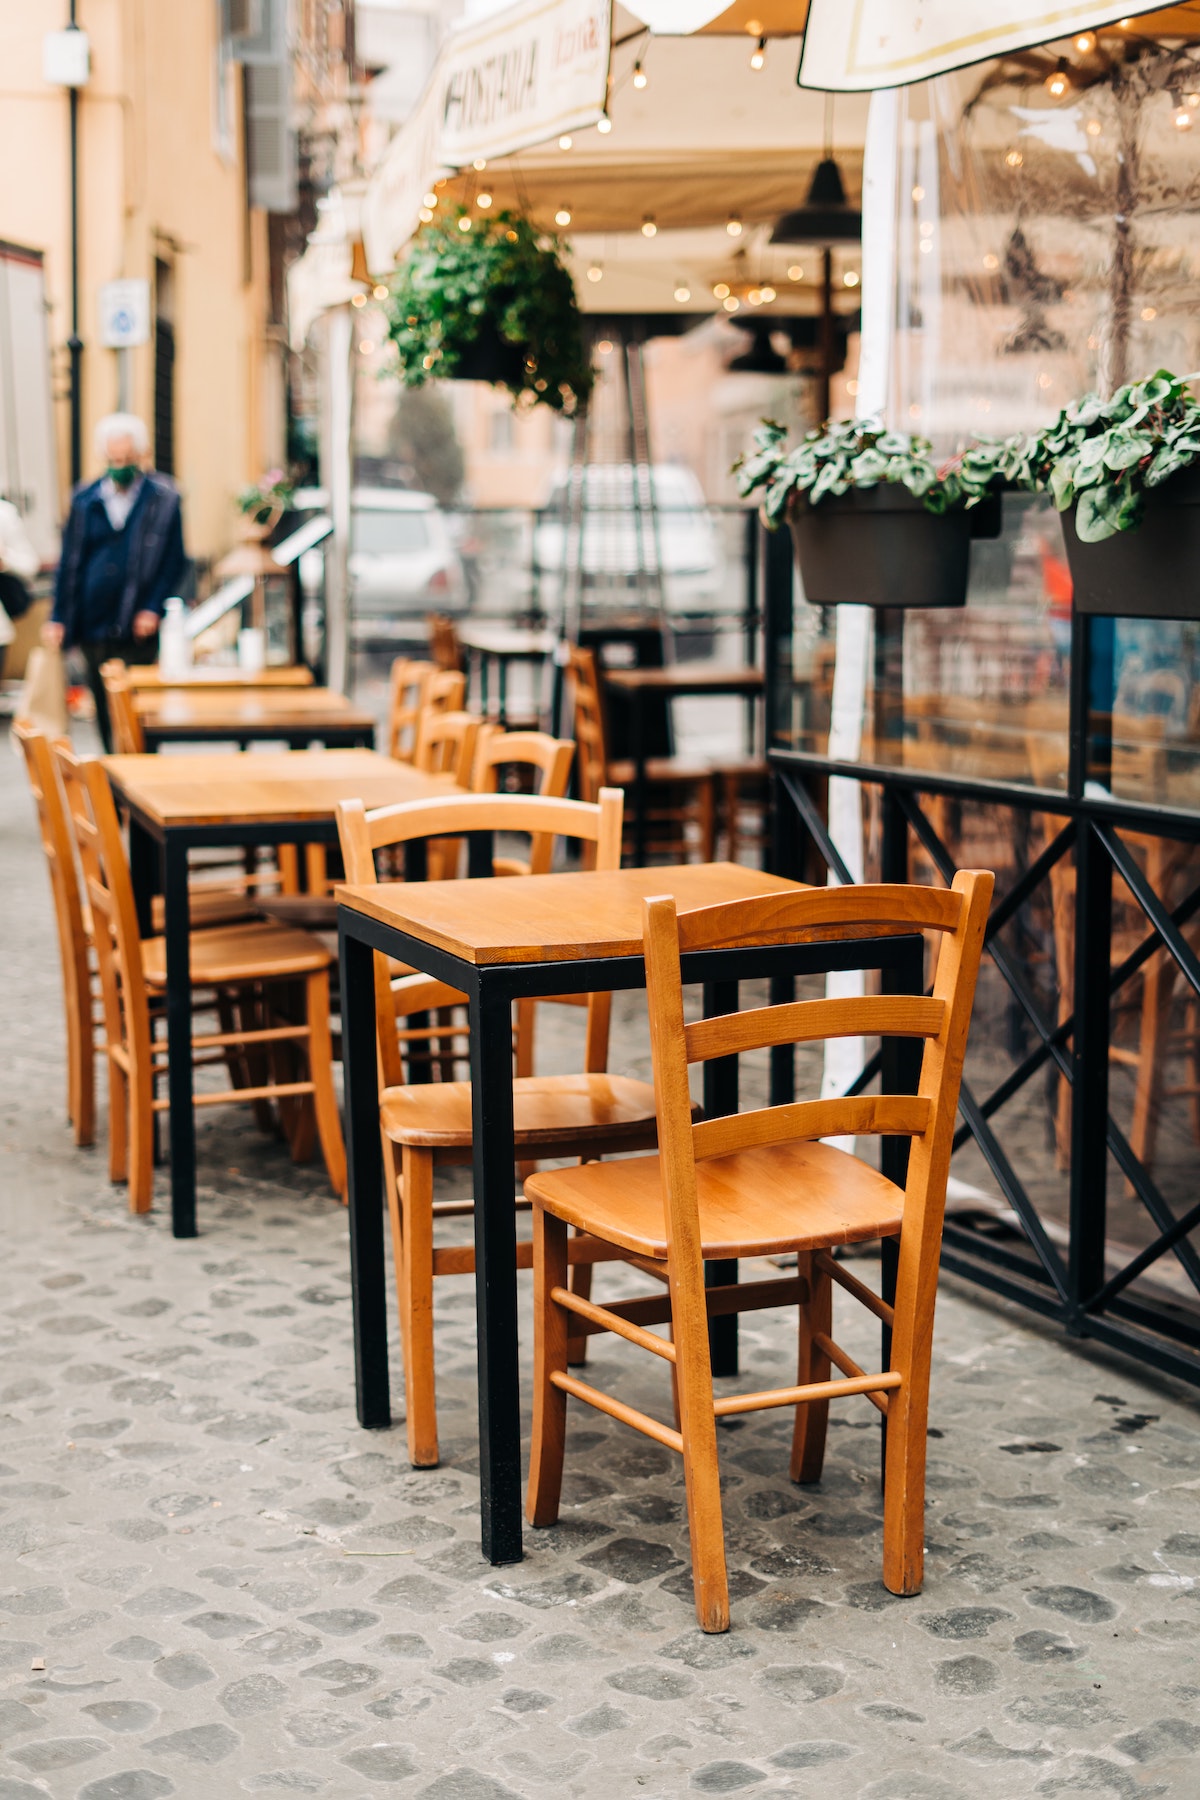 Wooden tables and chairs at a sidewalk cafe in Italy